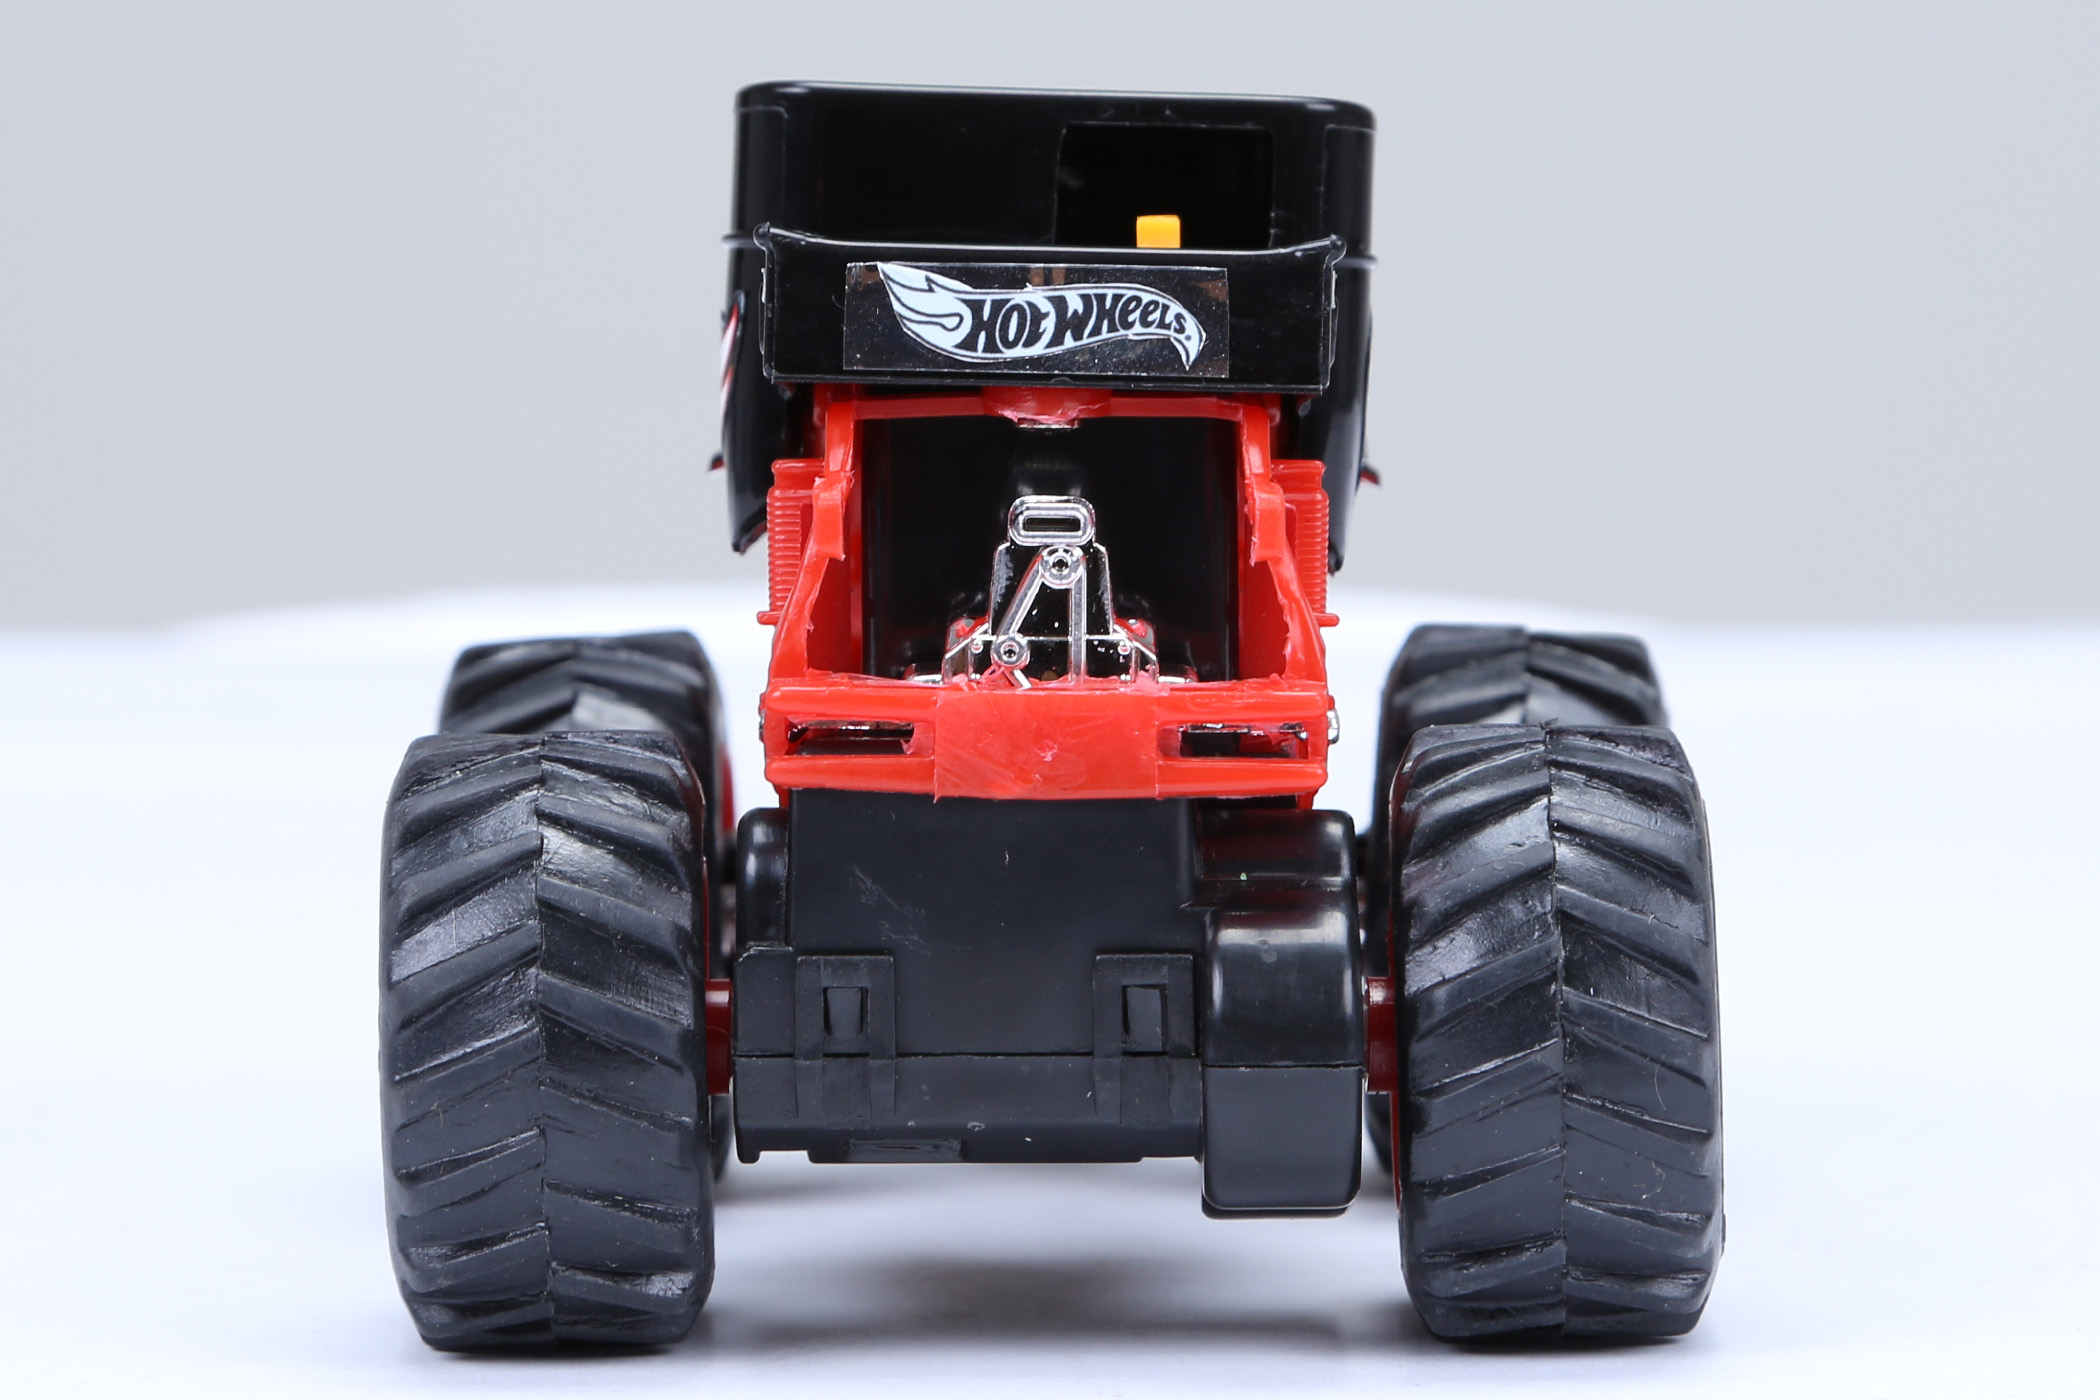 New Bright 1:43 Scale Remote Controlled Bone Shaker Monster Truck Play Vehicle - image 4 of 10